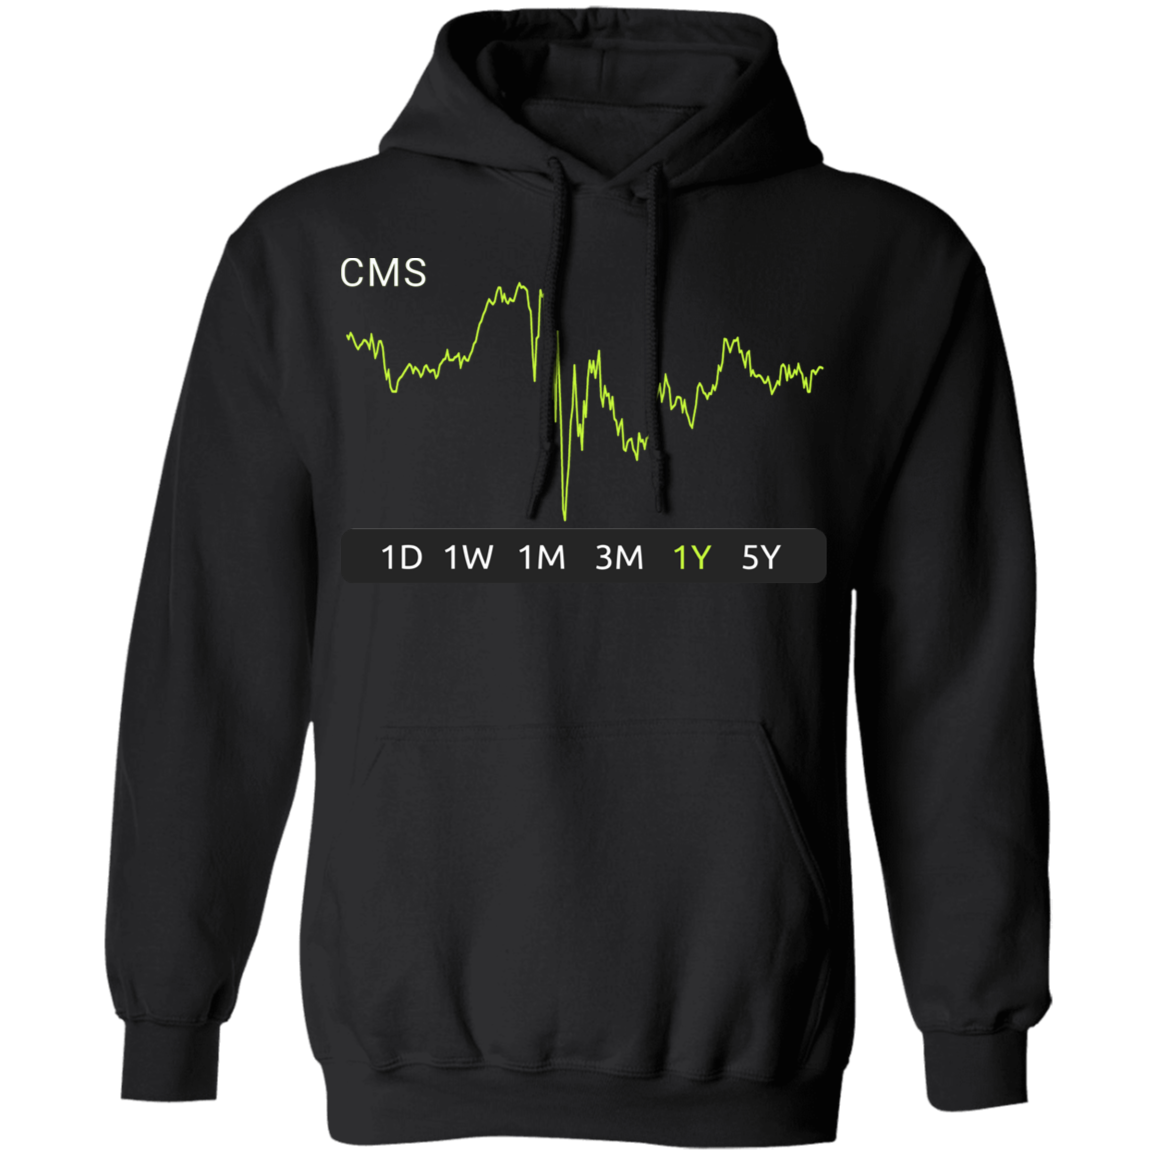 CMS Stock 1y Pullover Hoodie